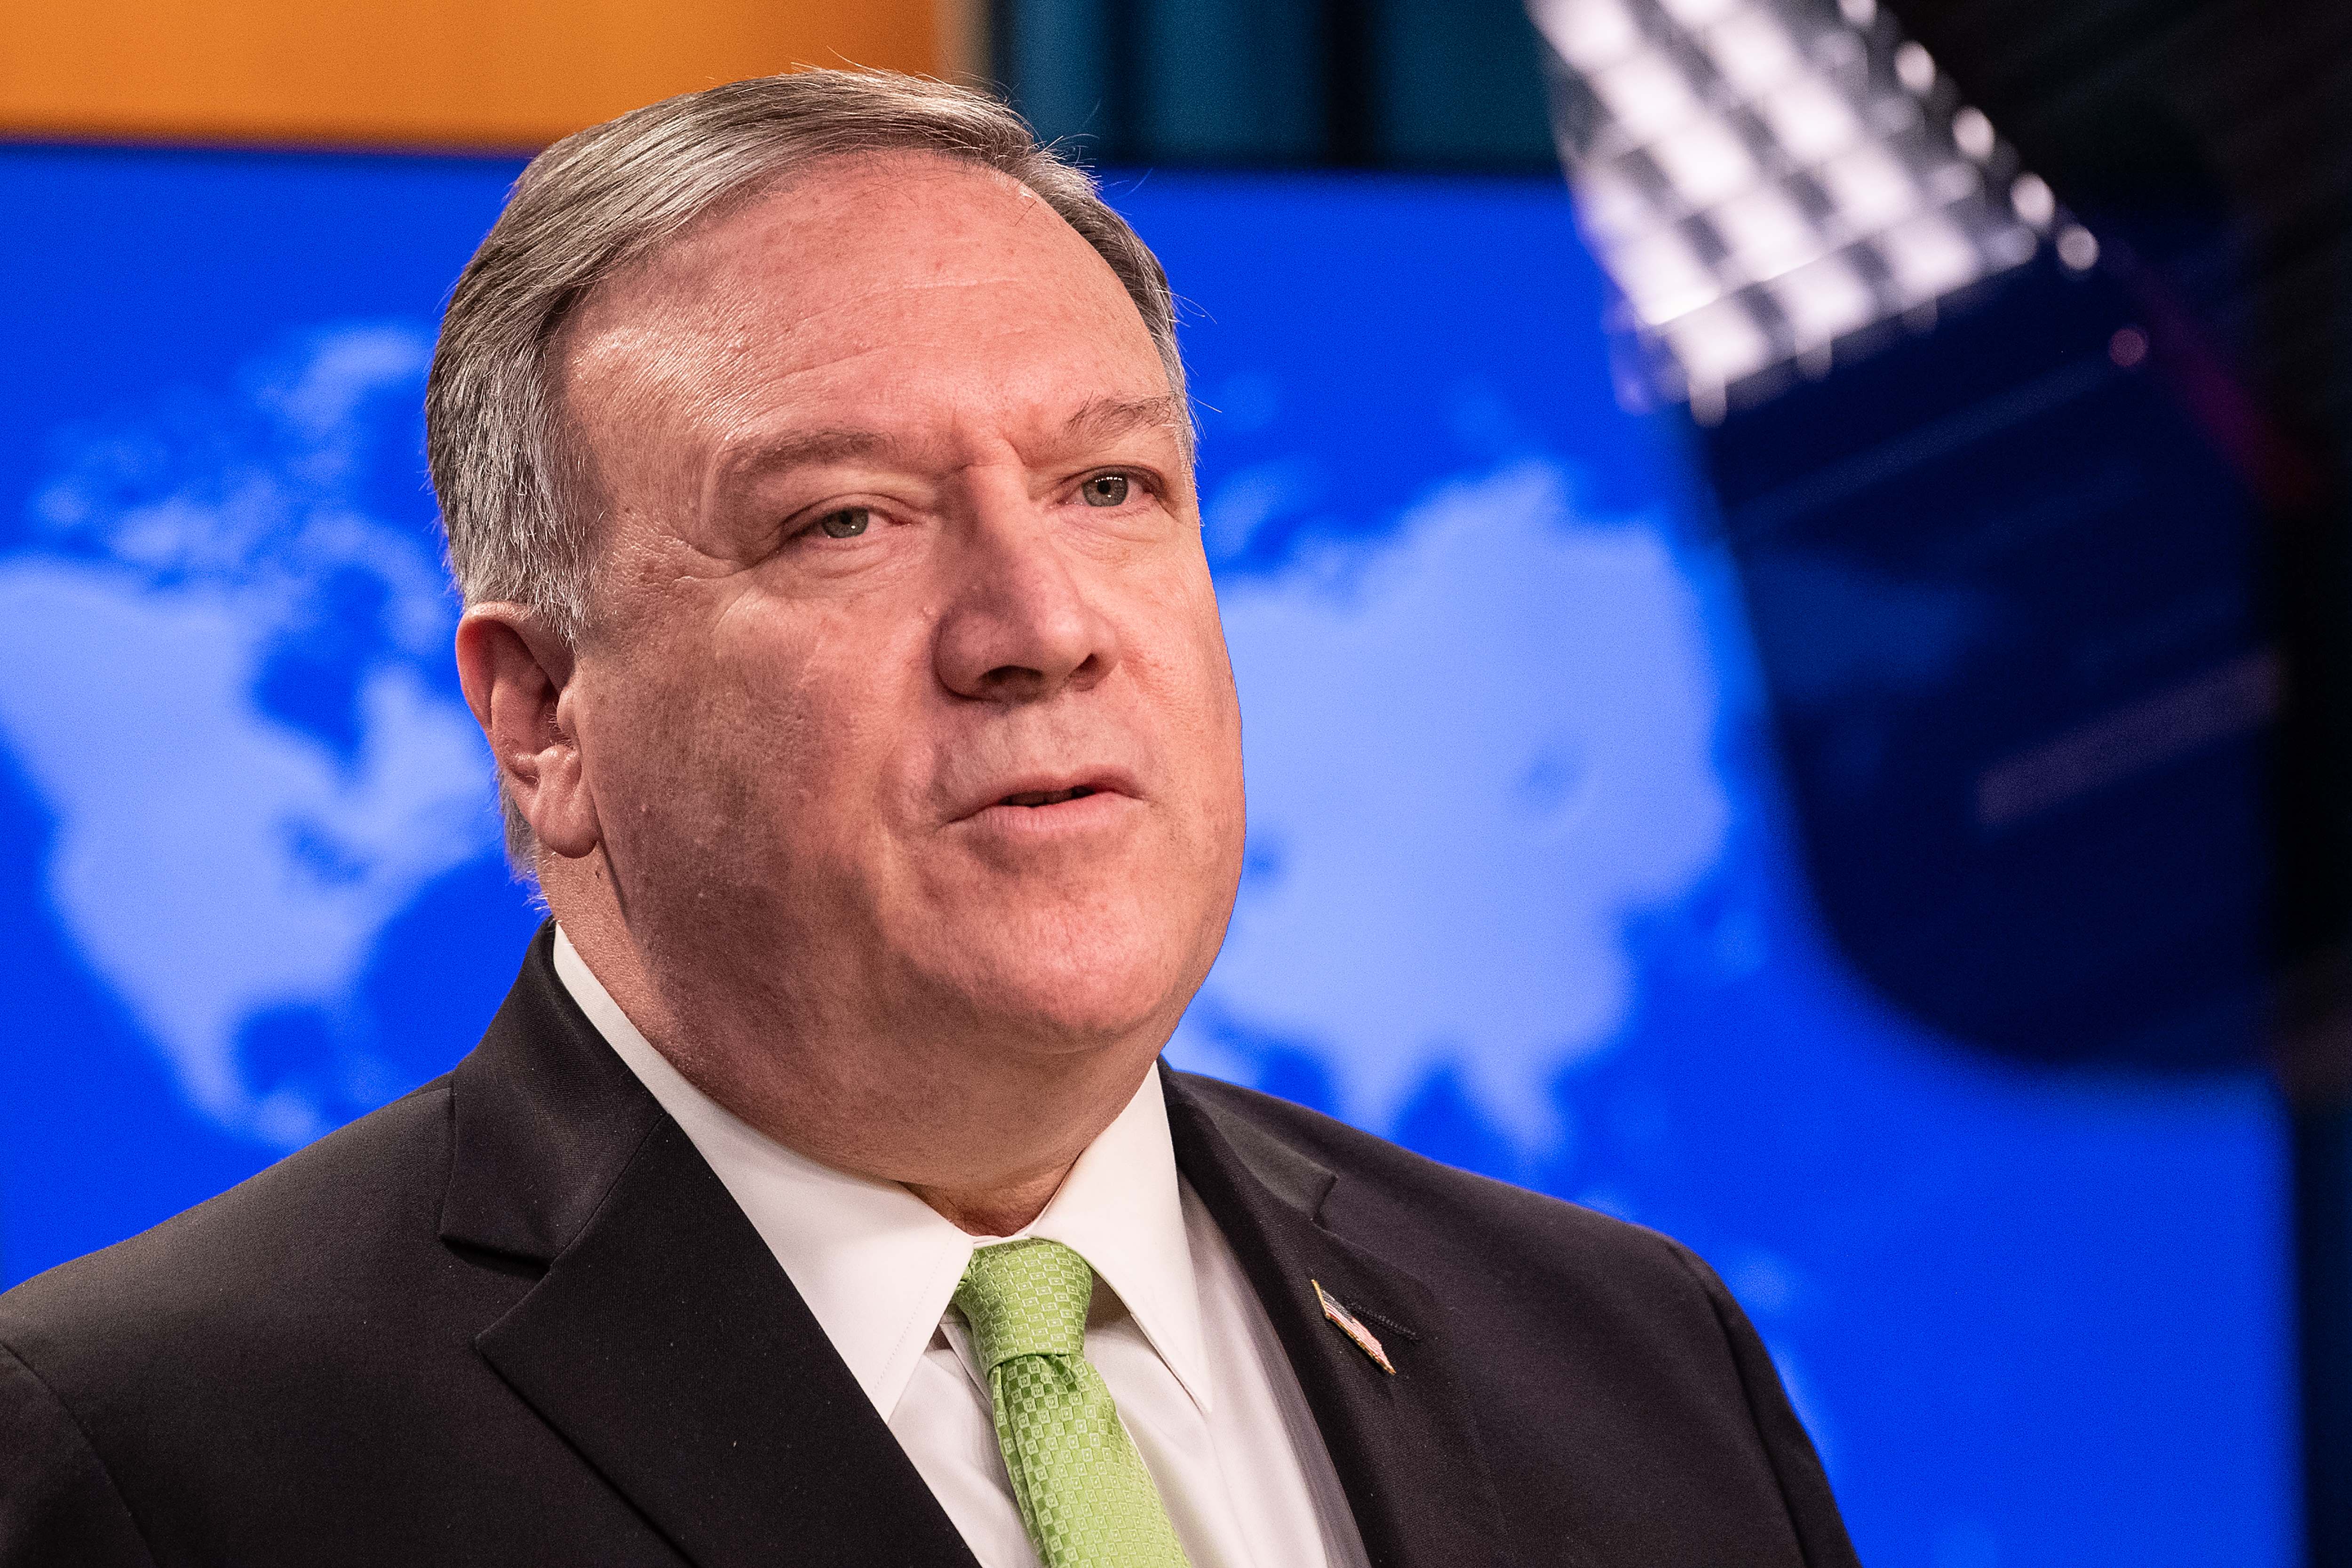 Pompeo declares that Hong Kong is no longer autonomous from China, threatening trade with U.S. - CNBC